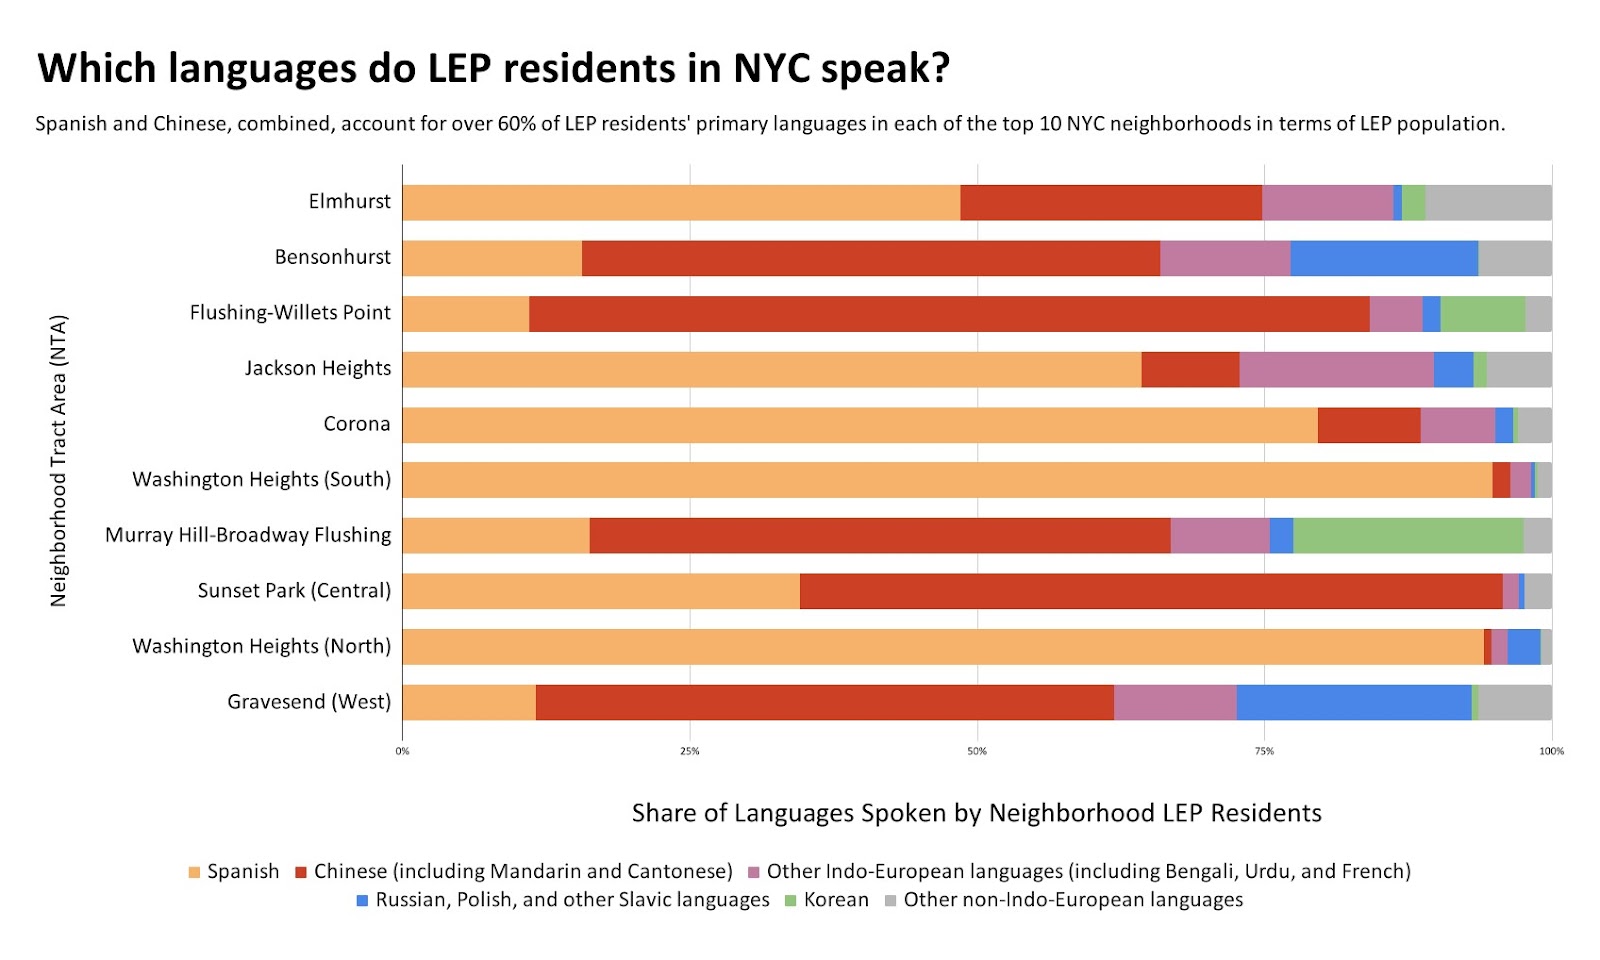 Spanish and Chinese, combined, account for over 60% of LEP residents' primary languages in each of the top 10 NYC neighborhoods in terms of LEP population.